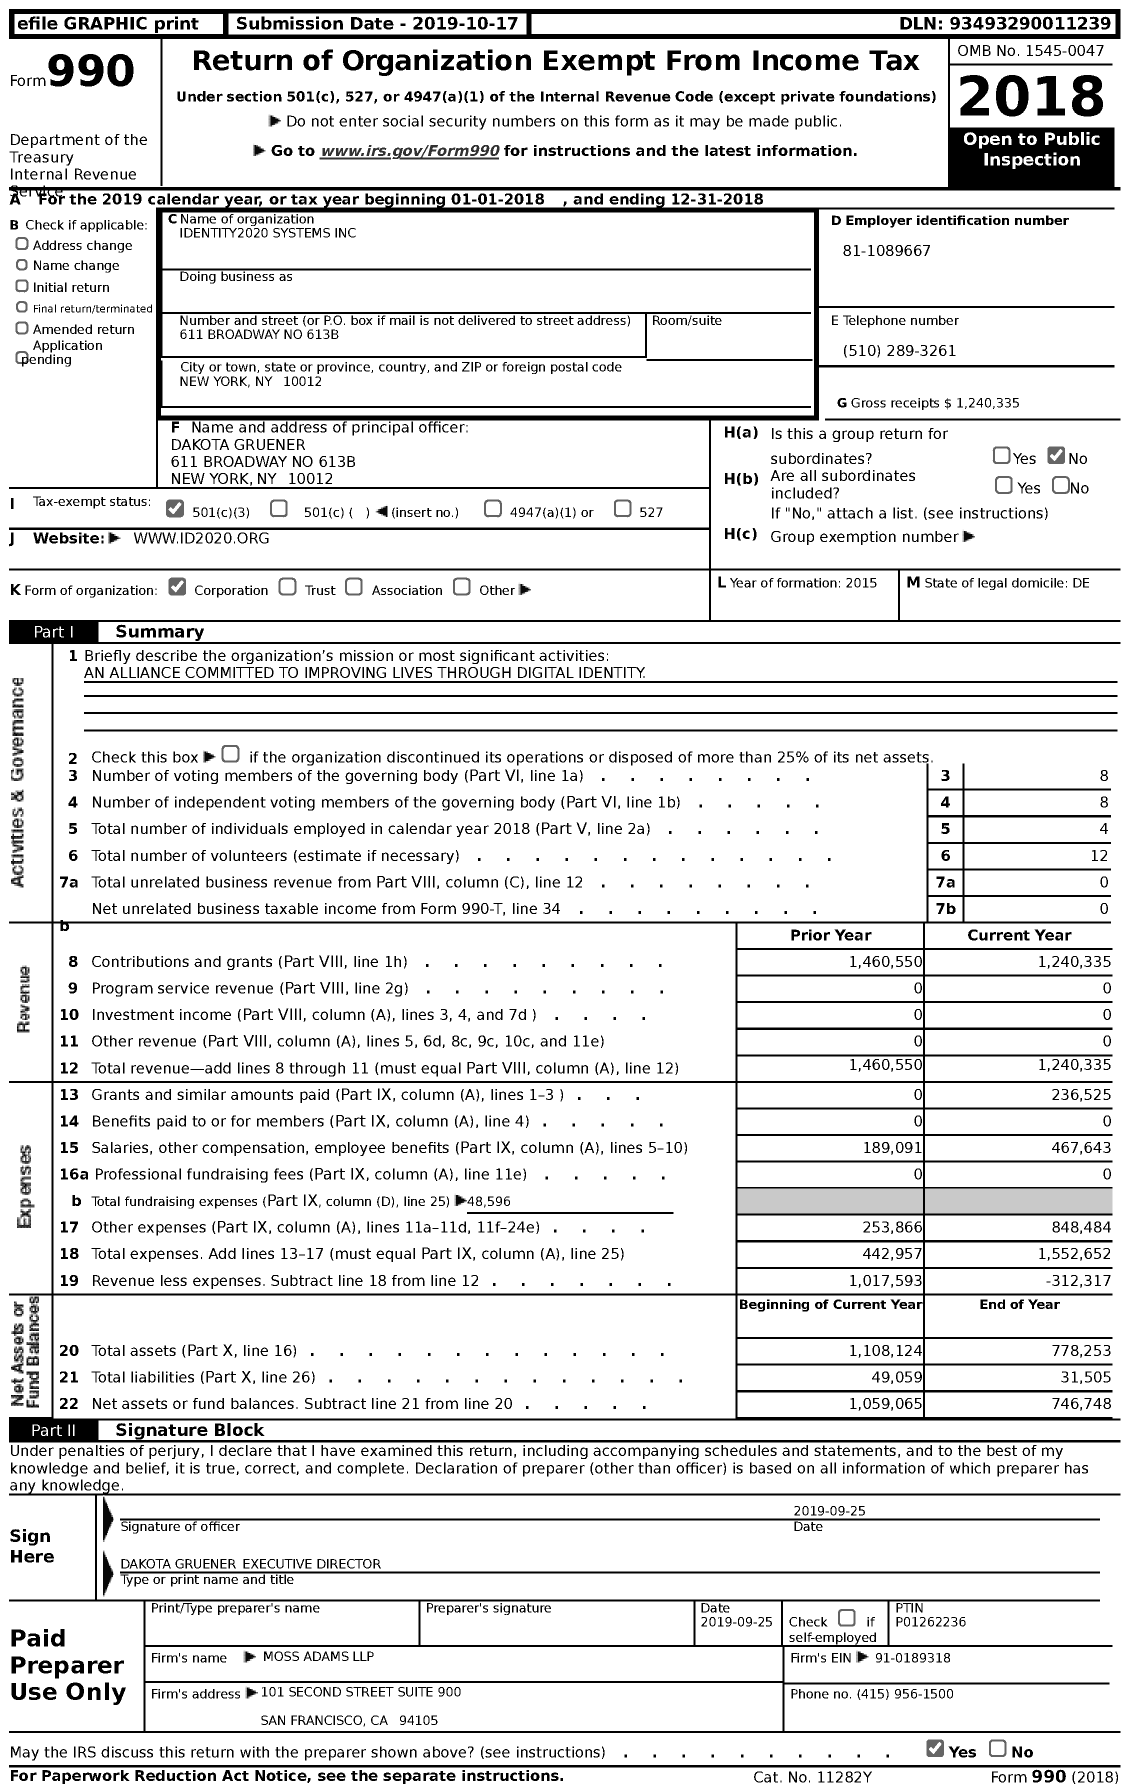 Image of first page of 2018 Form 990 for Identity2020 Systems